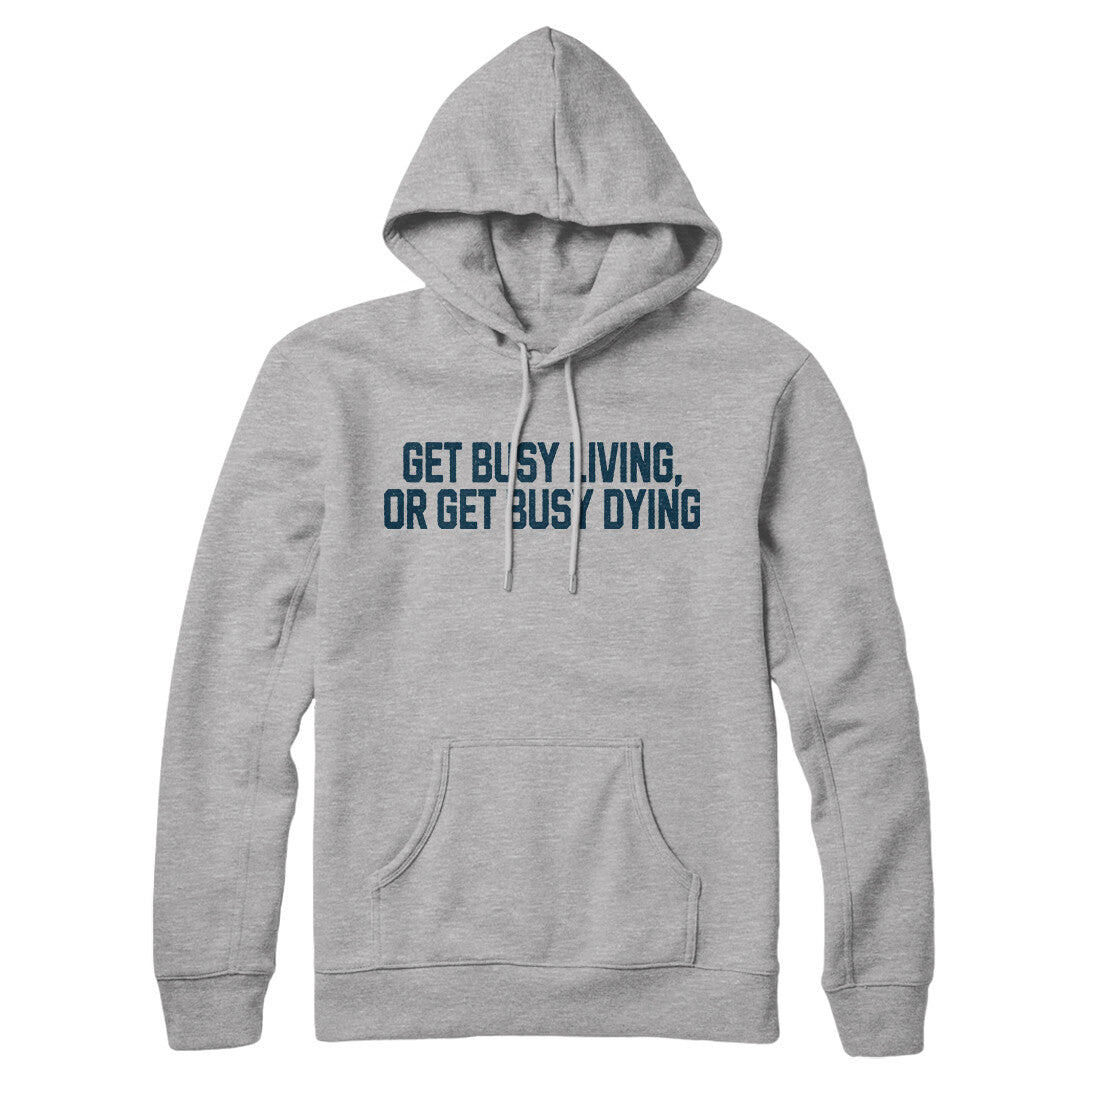 Get Busy Living or Get Busy Dying in Heather Grey Color